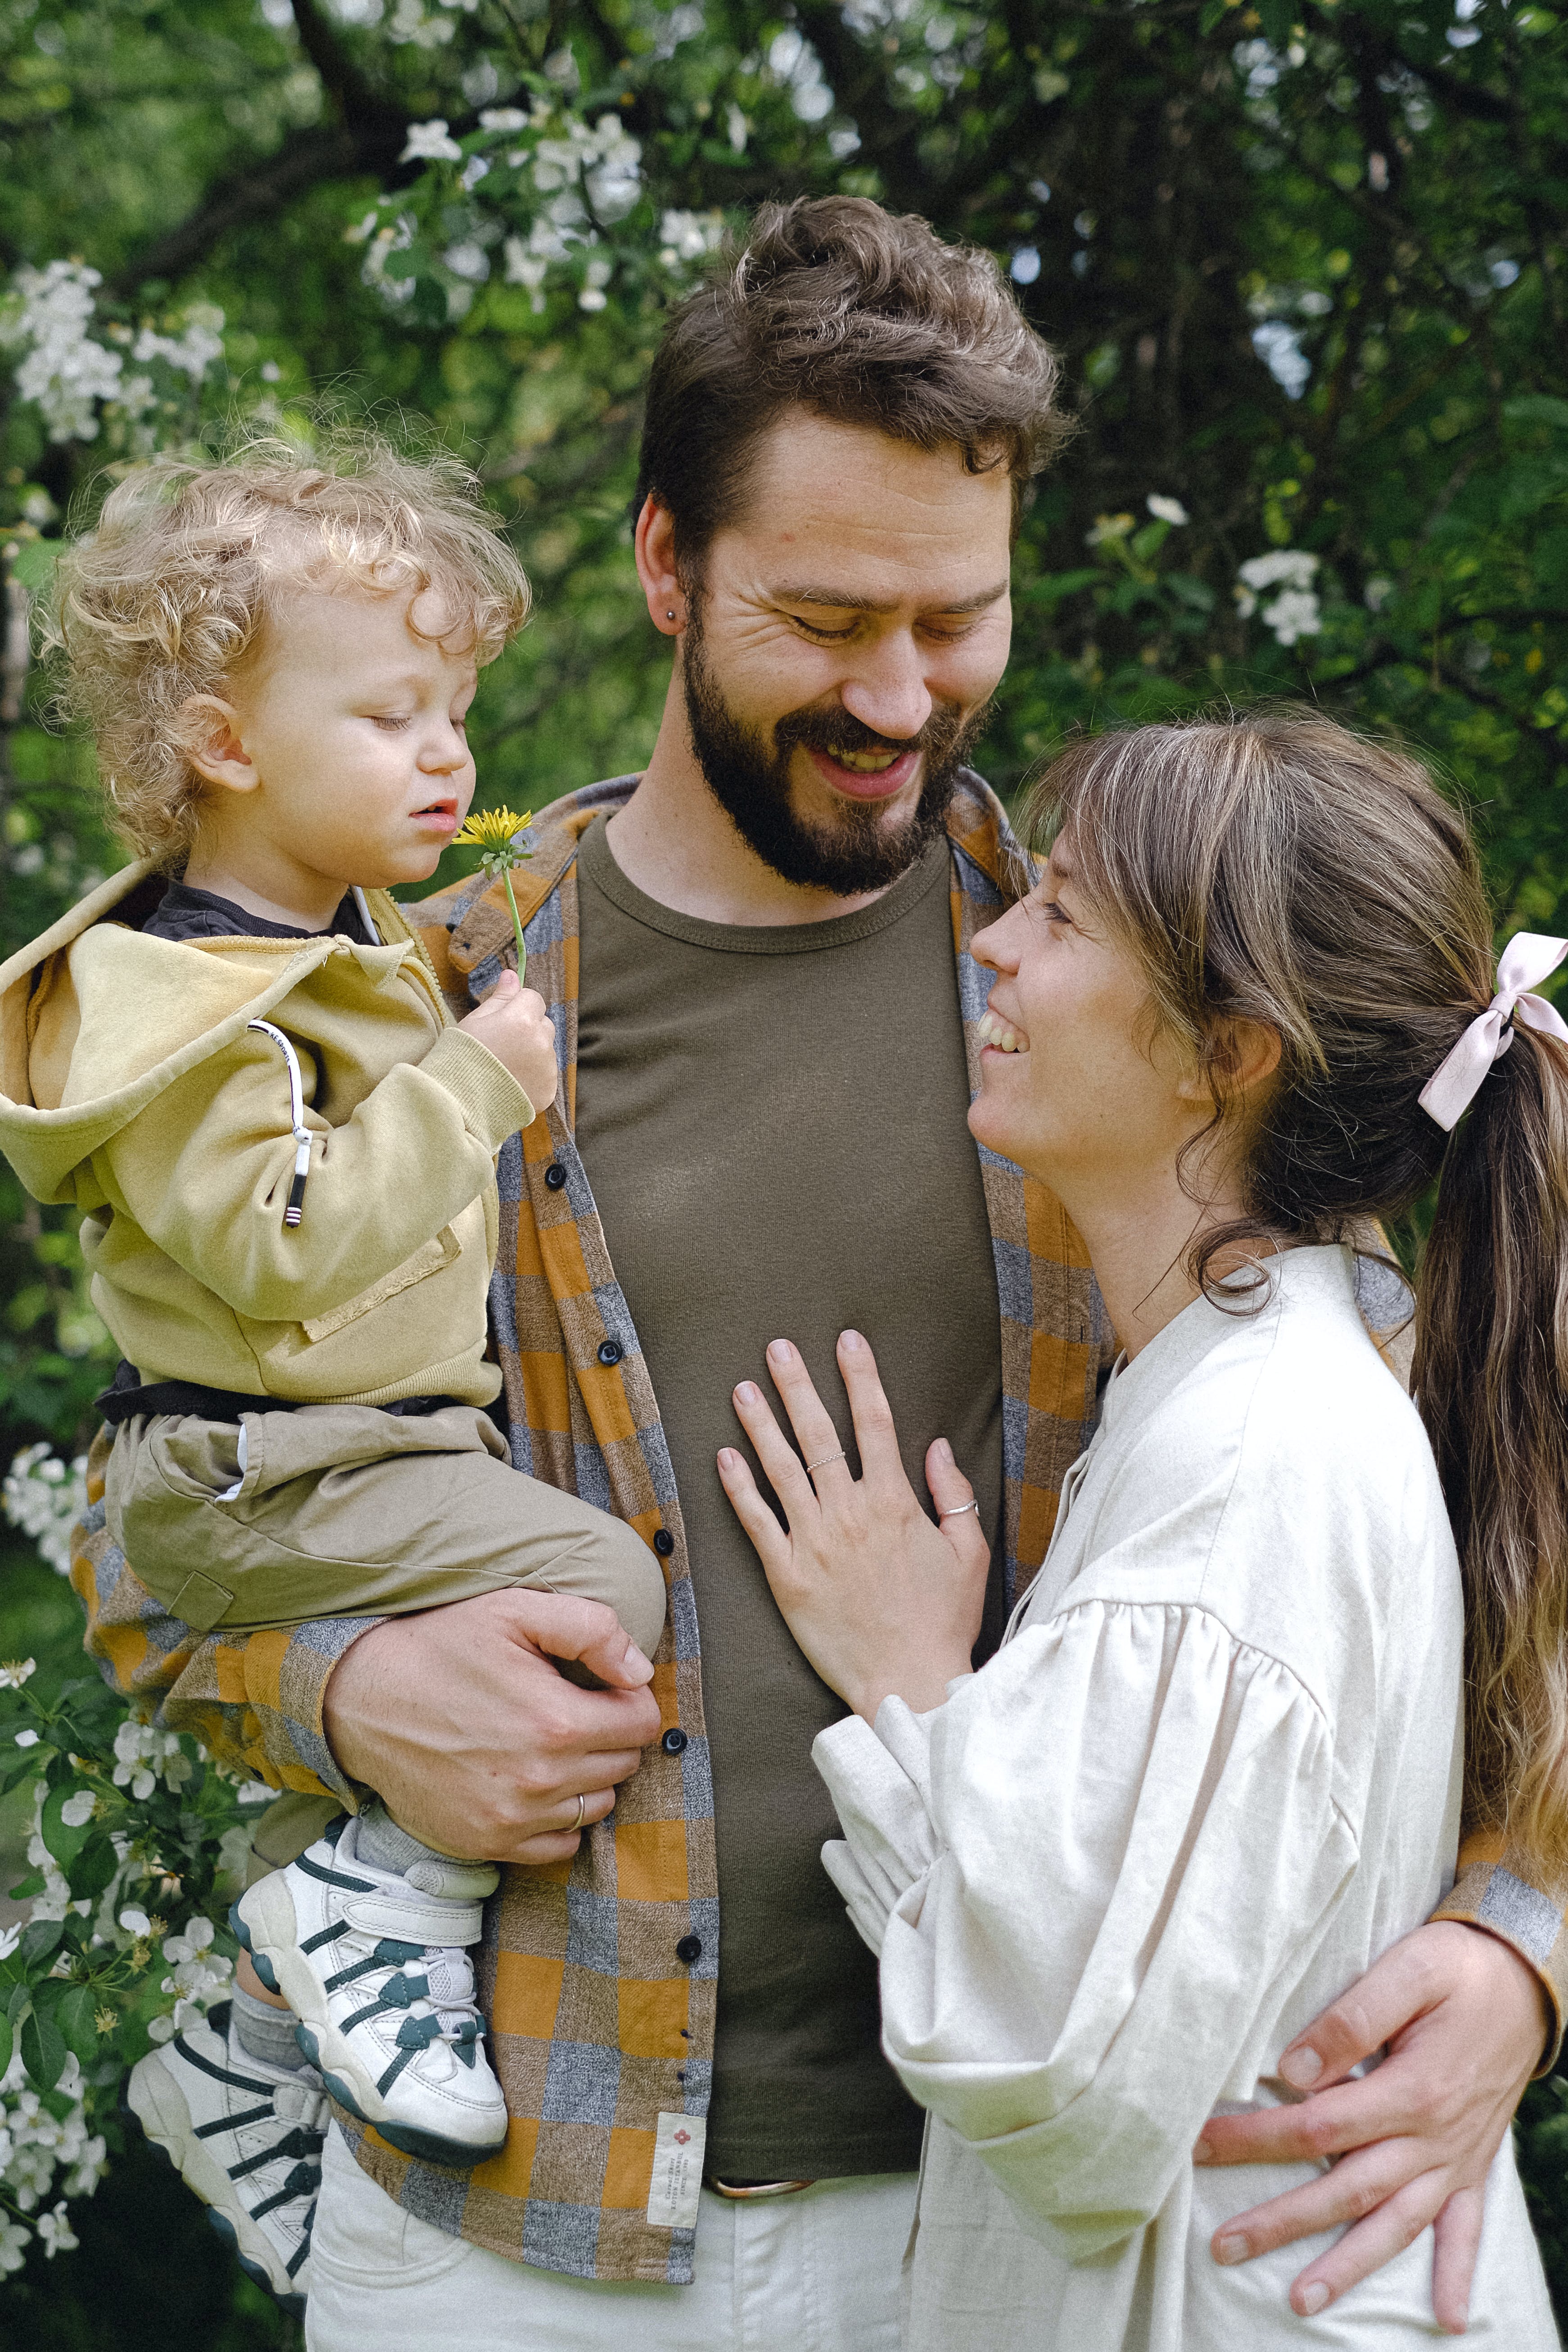 A happy couple with their young son | Source: Pexels